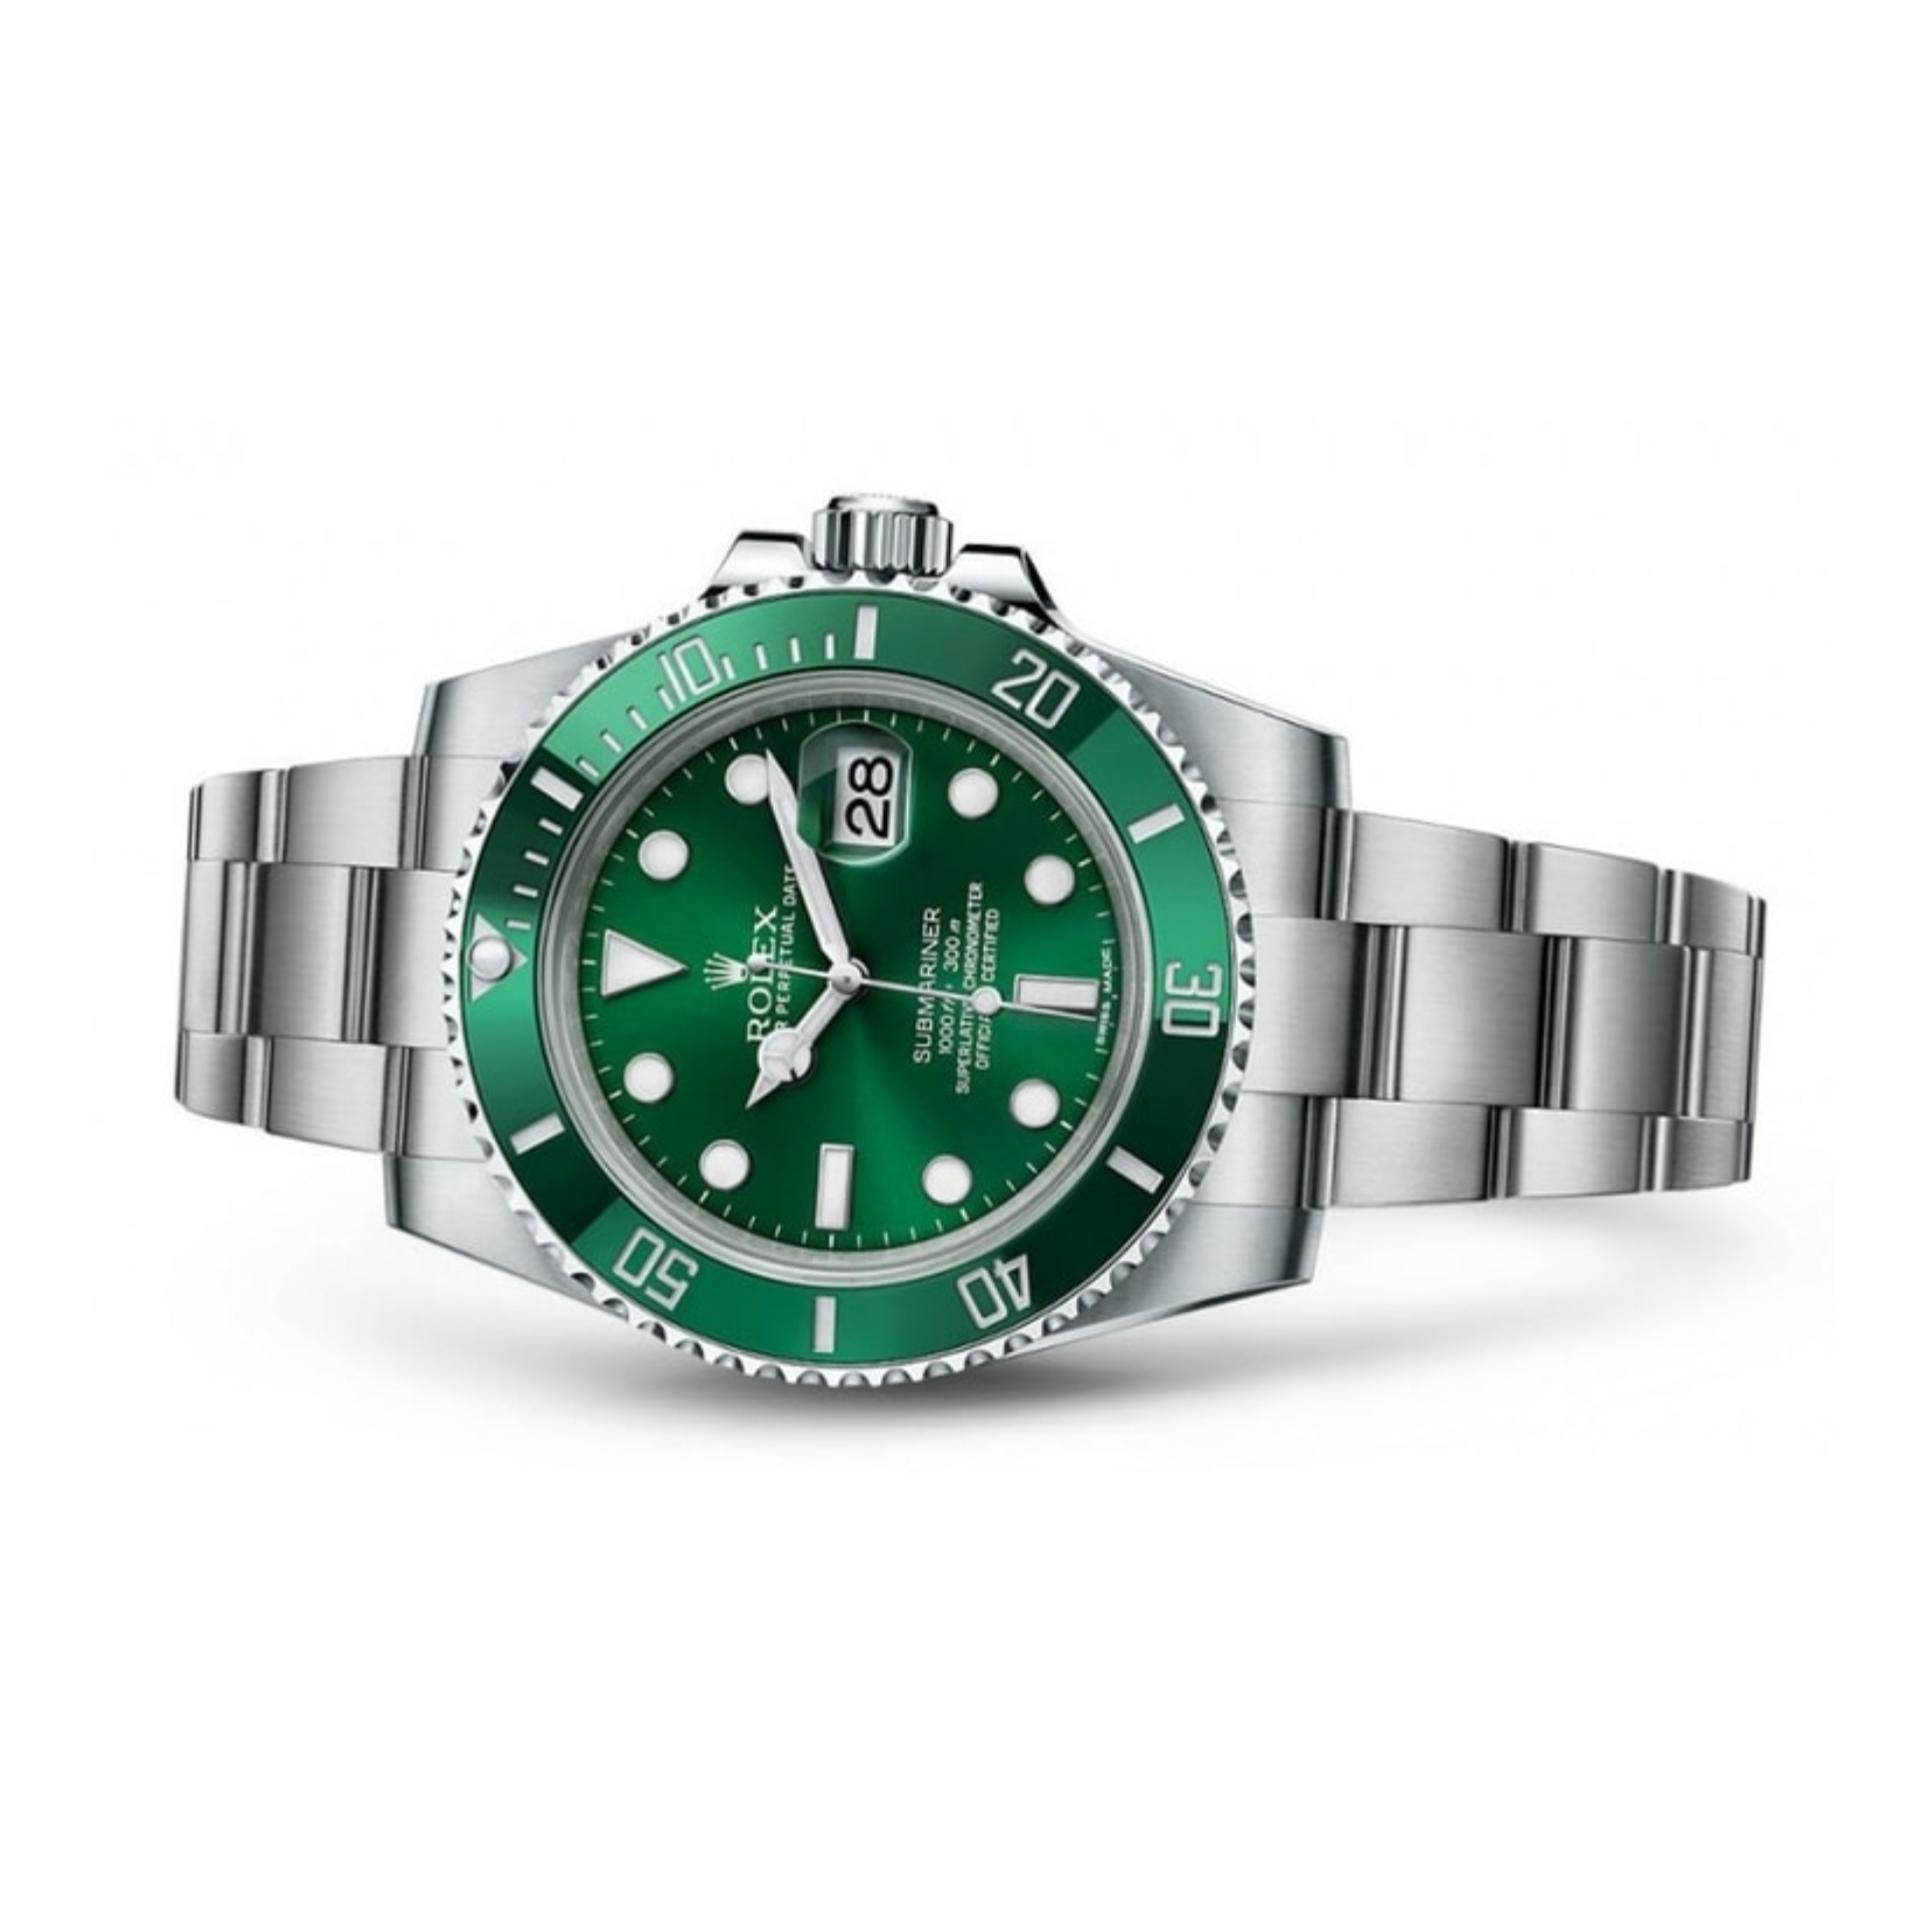 Brand: Rolex

Model Name: Submariner Date

Model Number: 116610LV

Movement: Mechanical Automatic

Case Size: 40 mm

Case Material: Stainless Steel

Dial: Green

Bracelet:  Stainless Steel 

Crystal: Sapphire Crystal 

Year:  2015 

Water